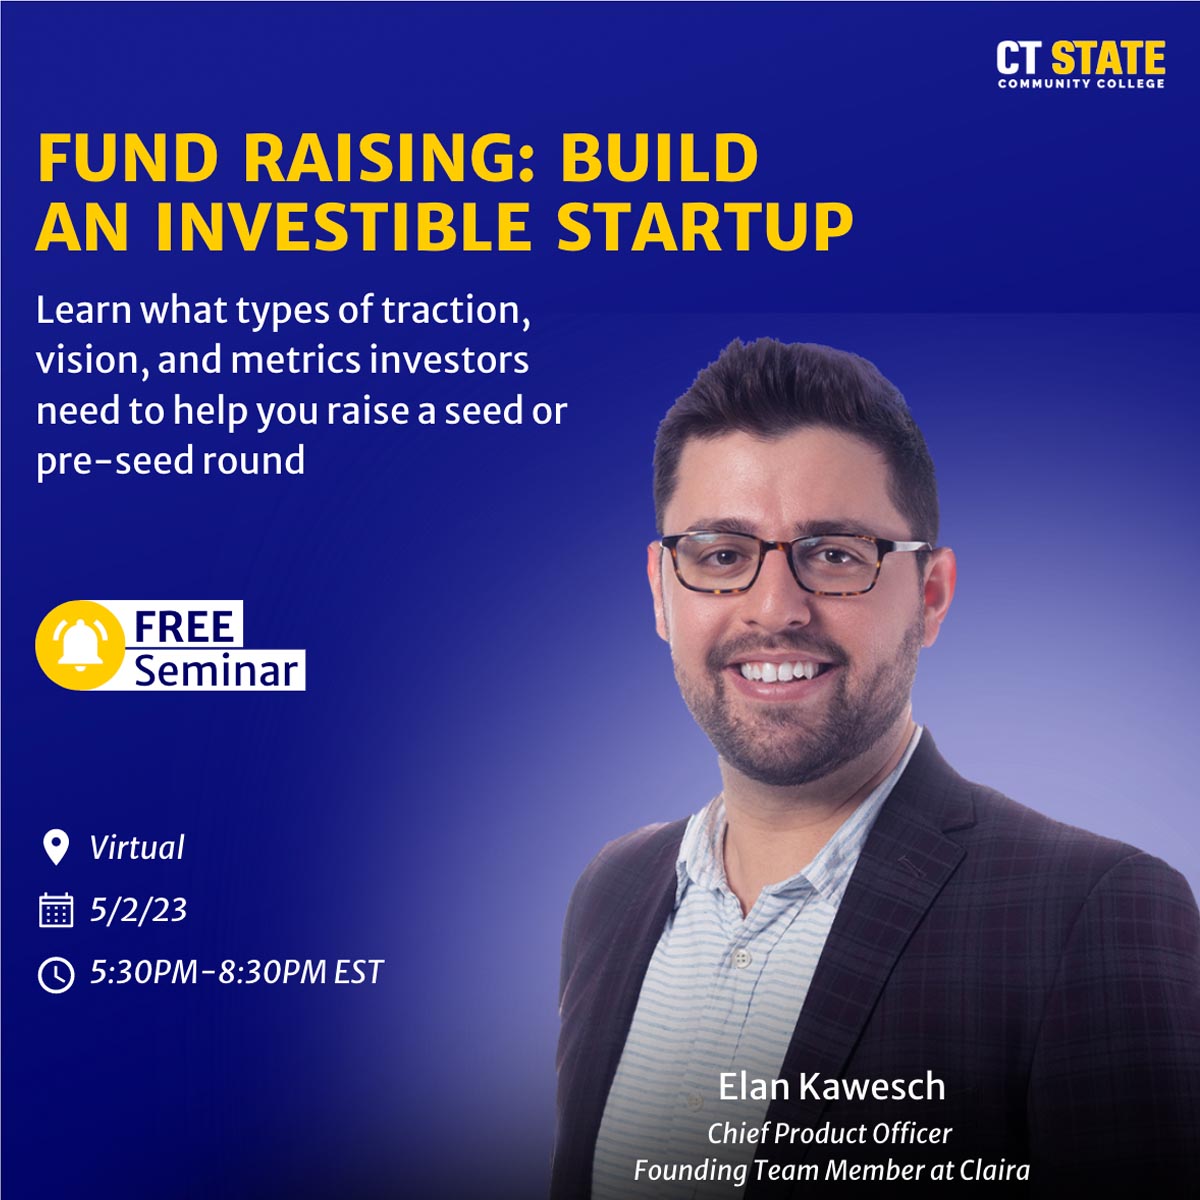 Fund Raising: Build an investible startup (5/2)